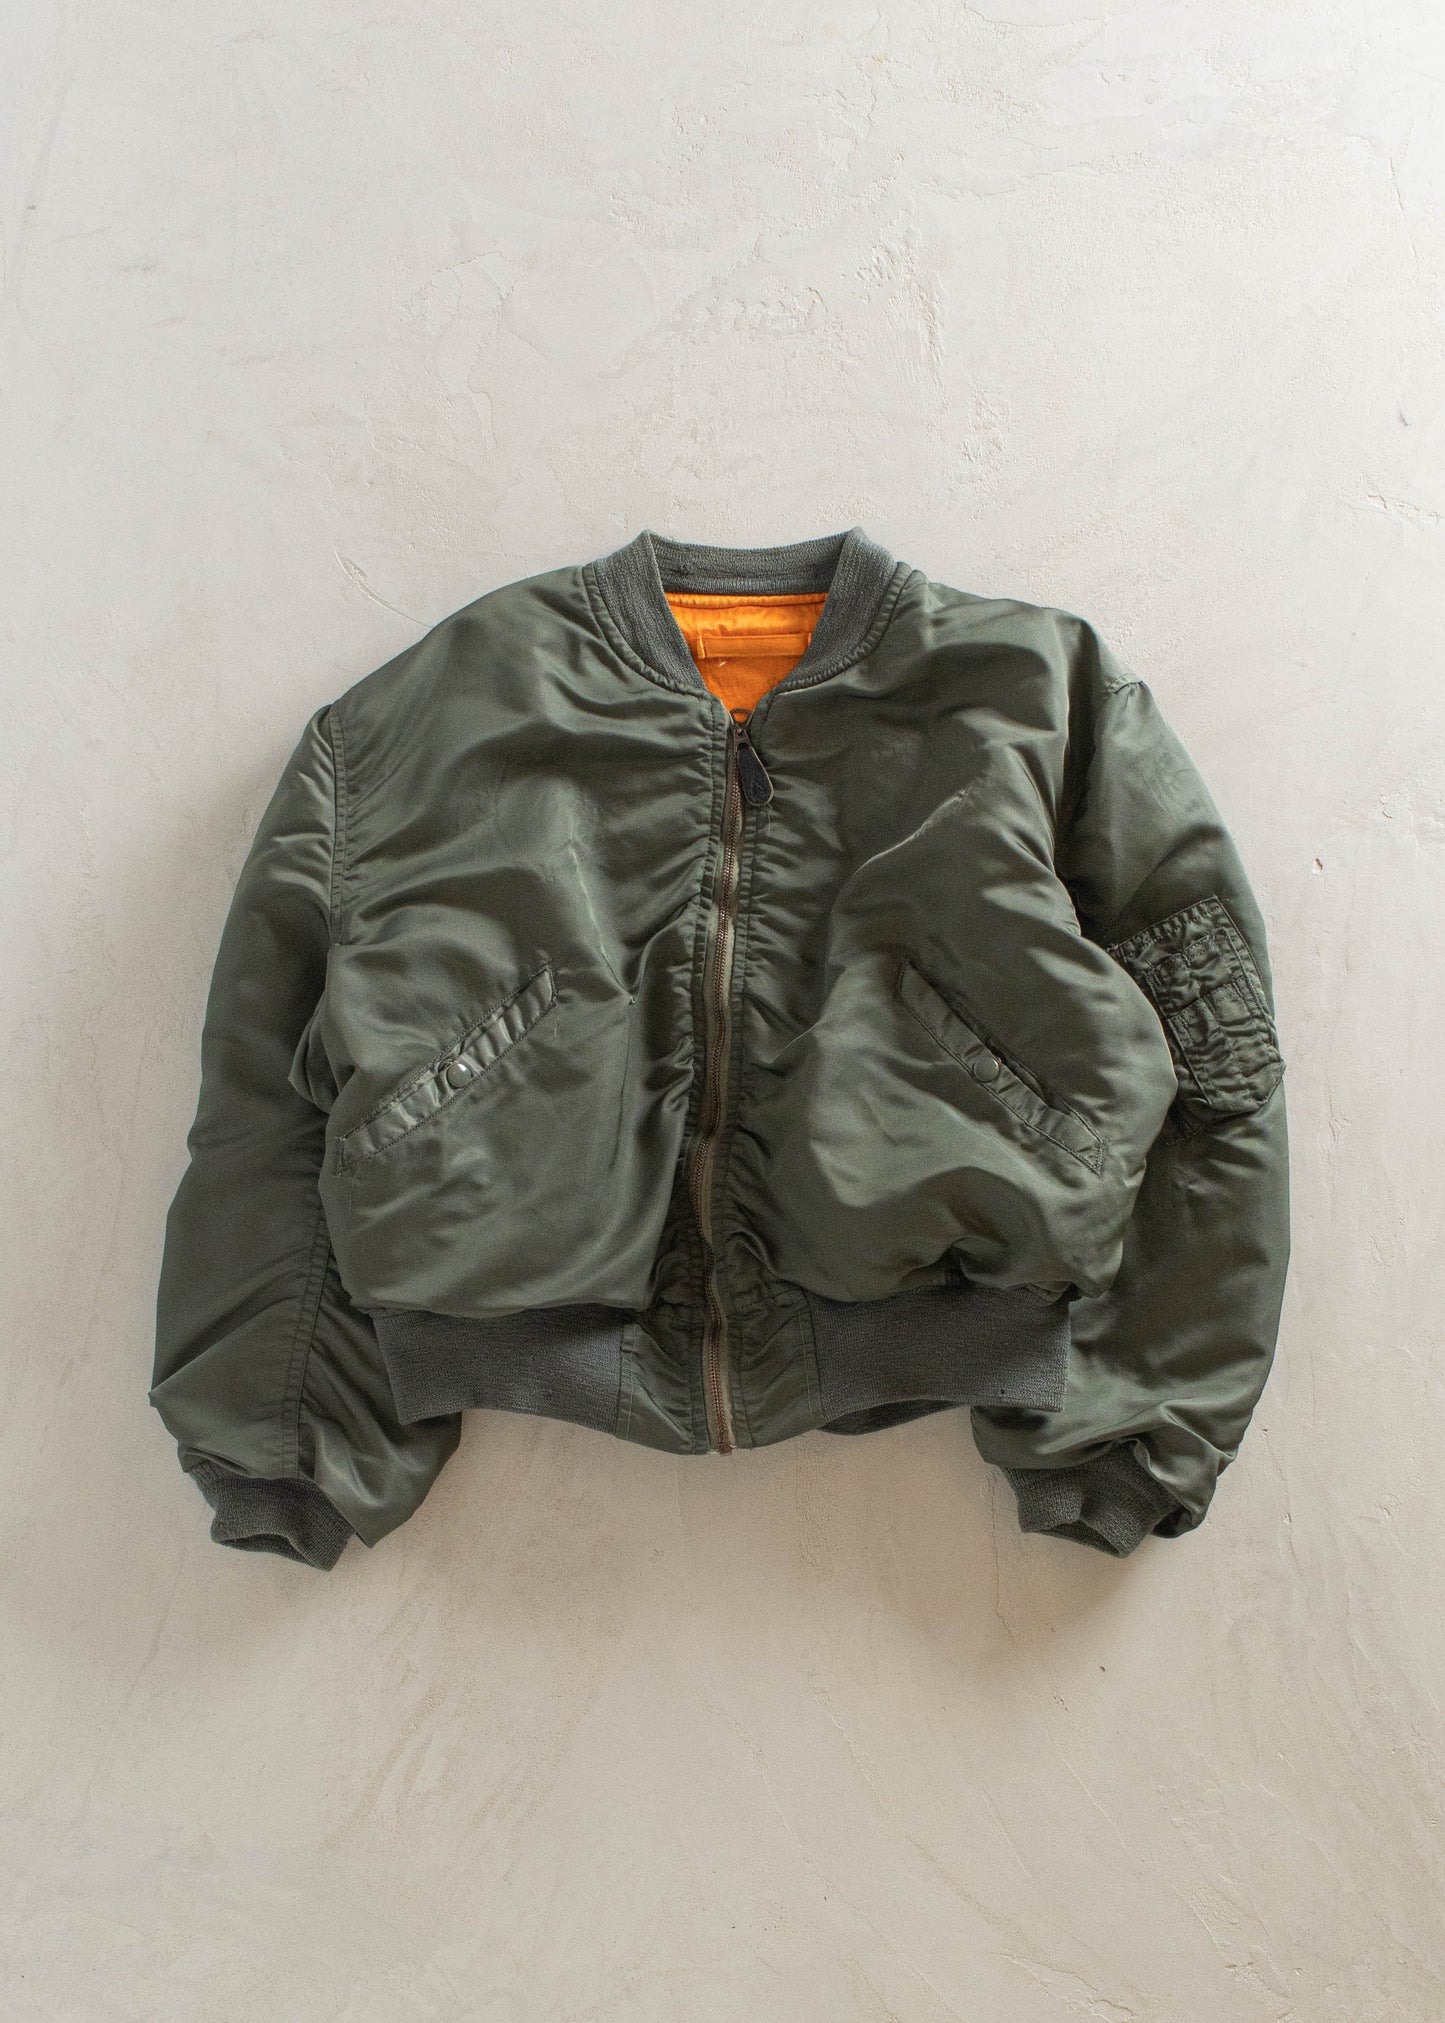 1960s Alpha Industries Flying Aviator Bomber Jacket Size M/L